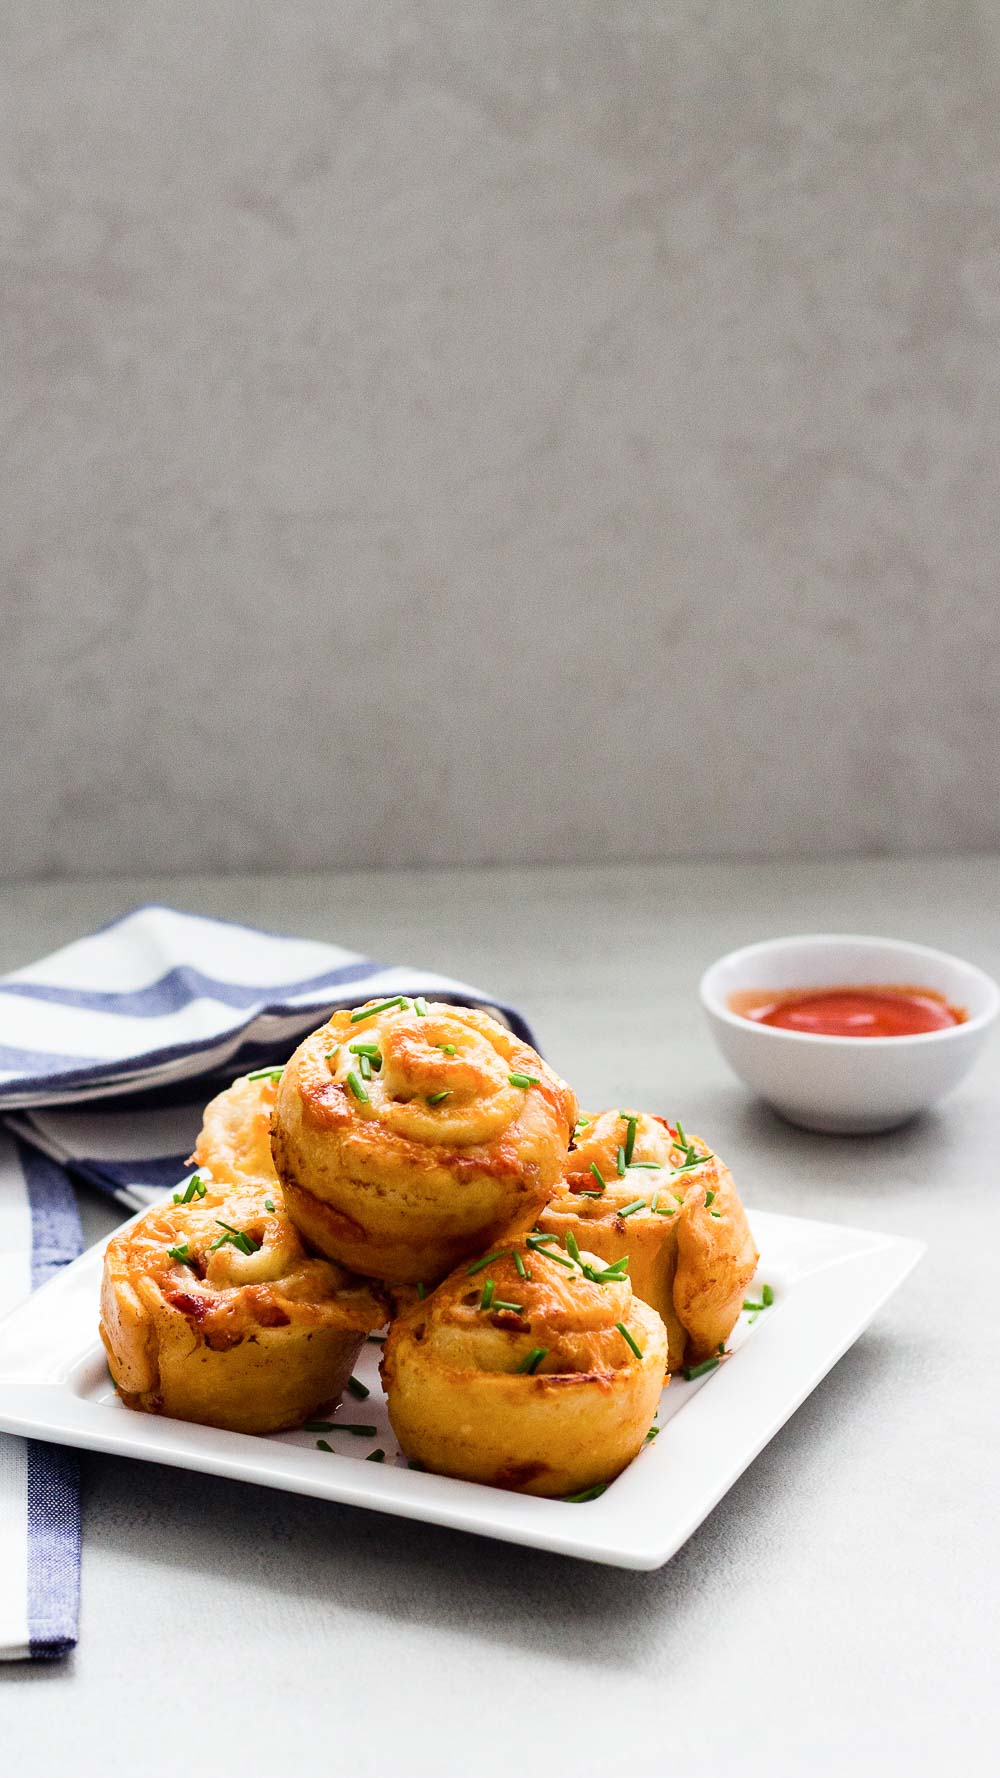 Easy pizza roll are perfect for your appetizer at home or your next gathering. Fun, tasty, and easy to make, these pizza roll is a must at any party and be on the table in a flash. Whip up a batch and fulfill that salty snack craving.